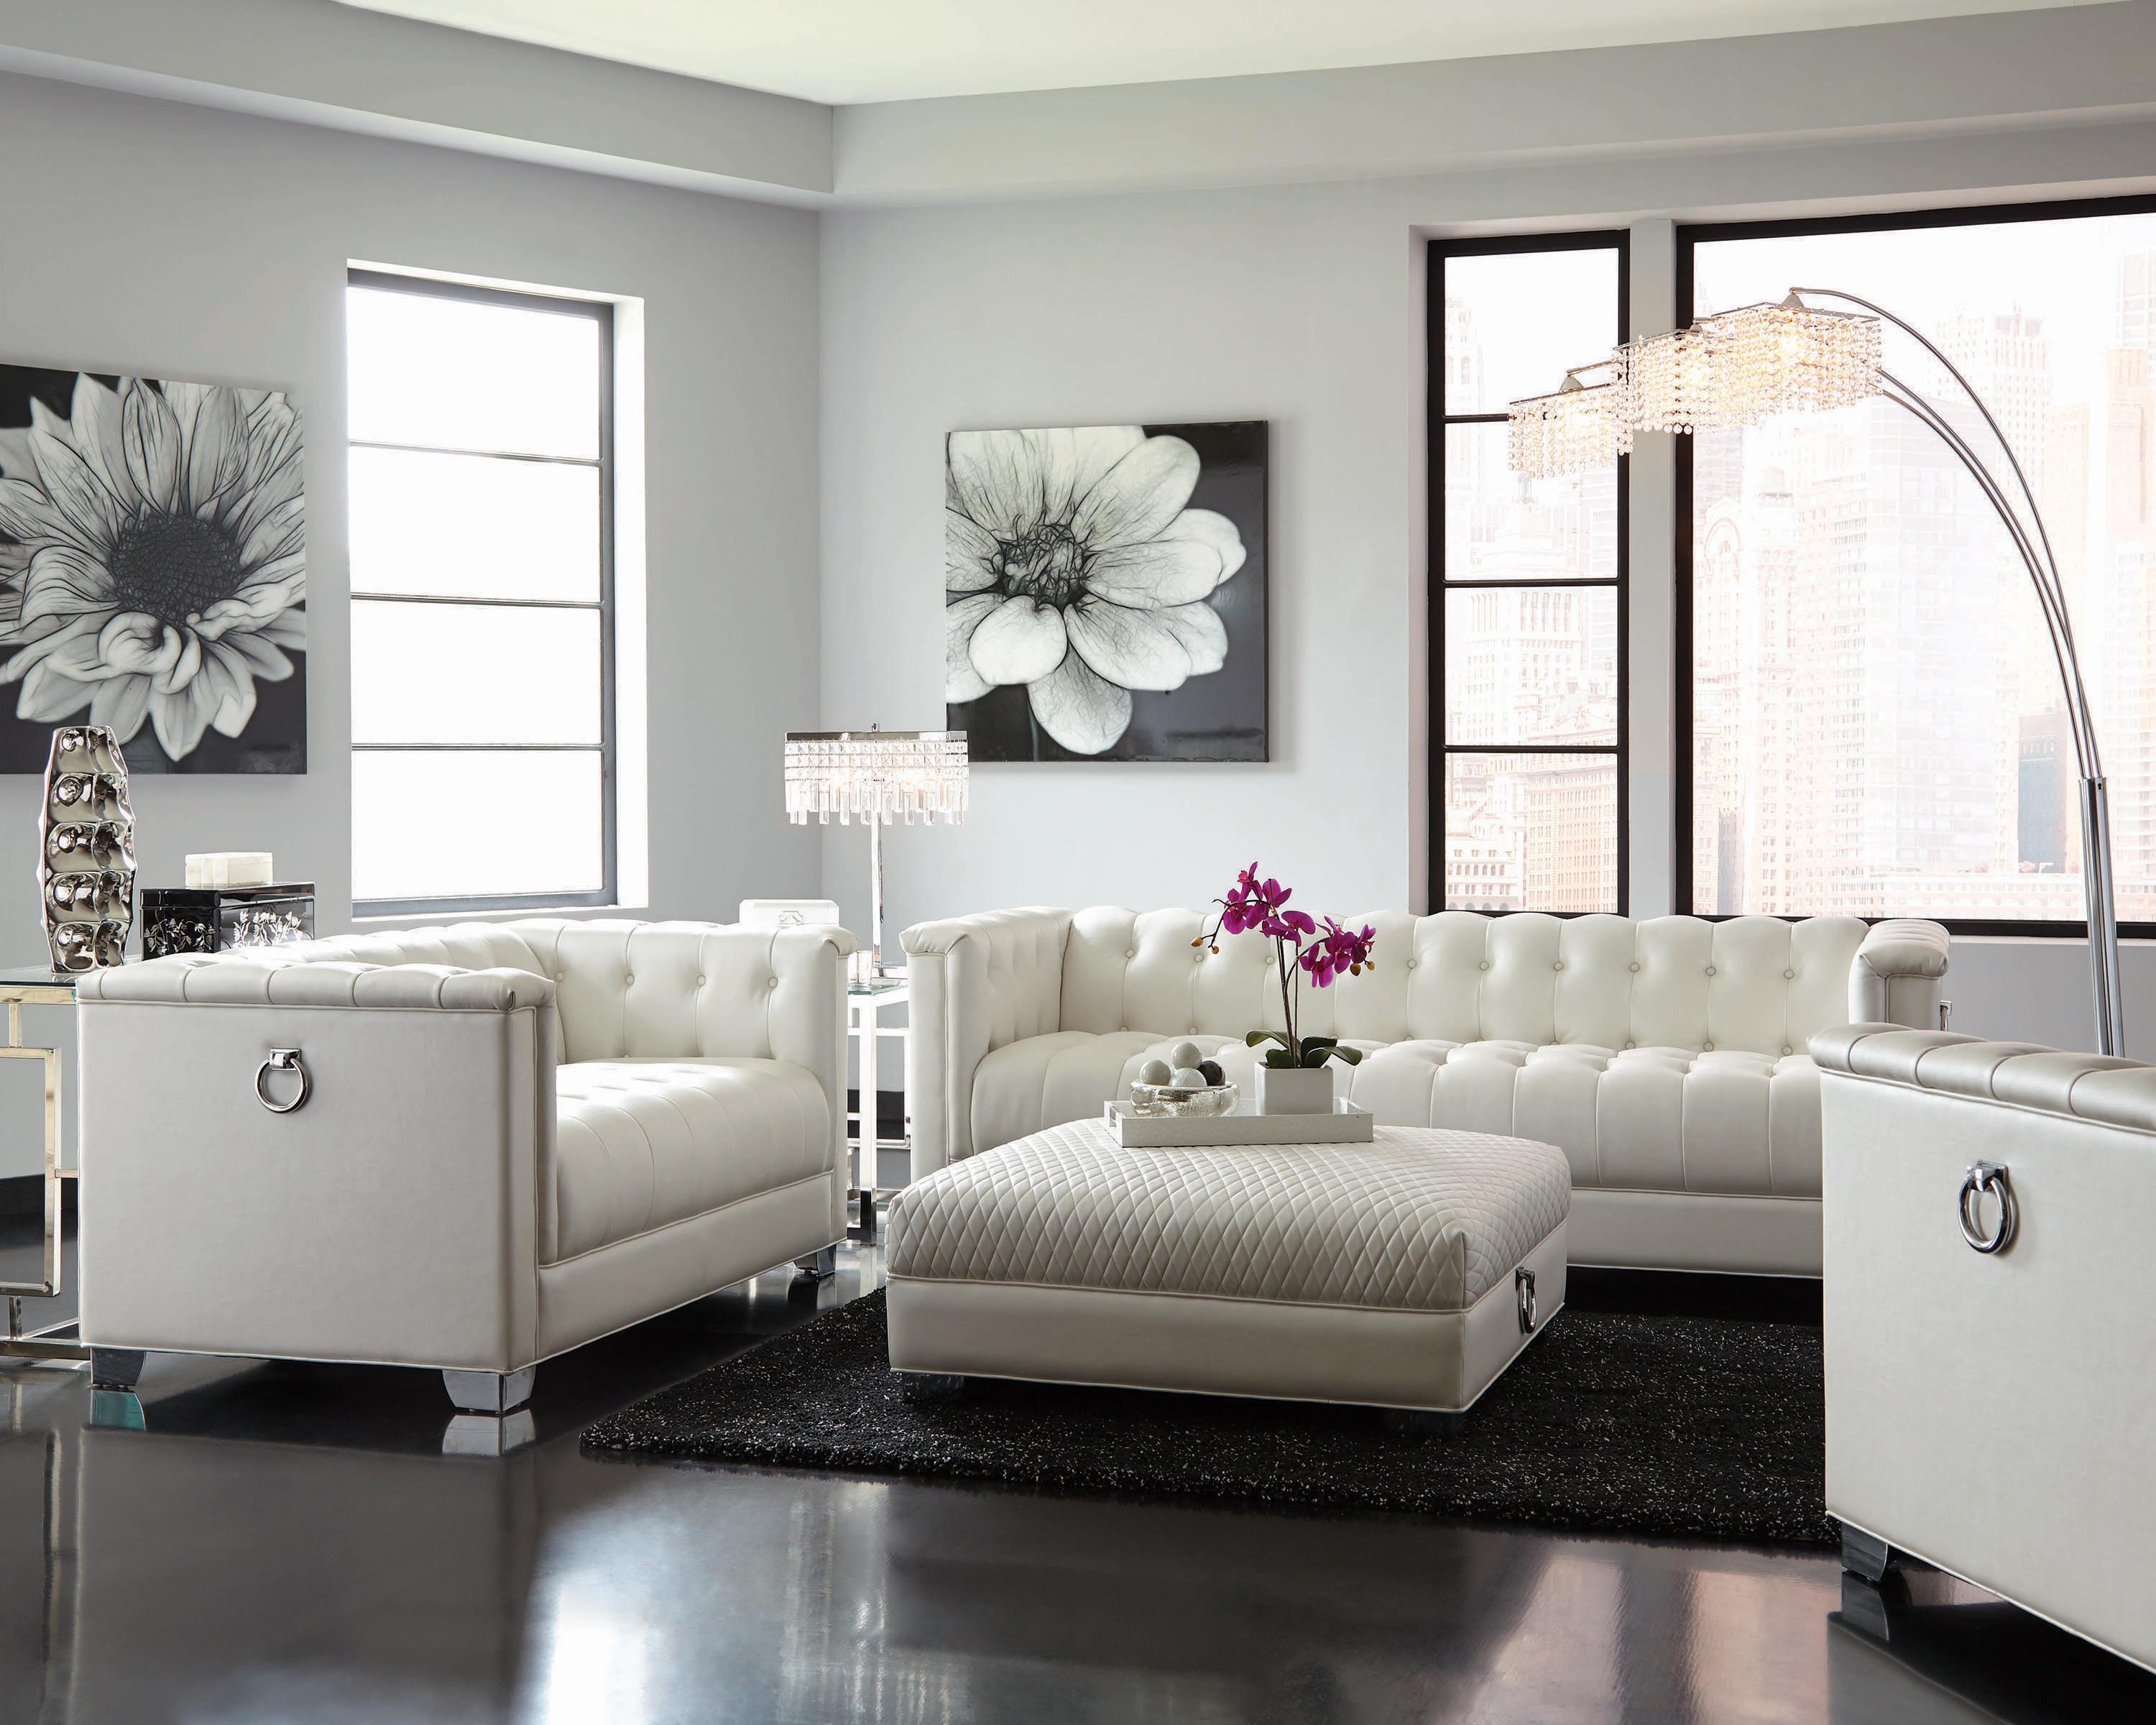 Contemporary Living Room Set 505391-S2 Chaviano 505391-S2 in Pearl White Leatherette